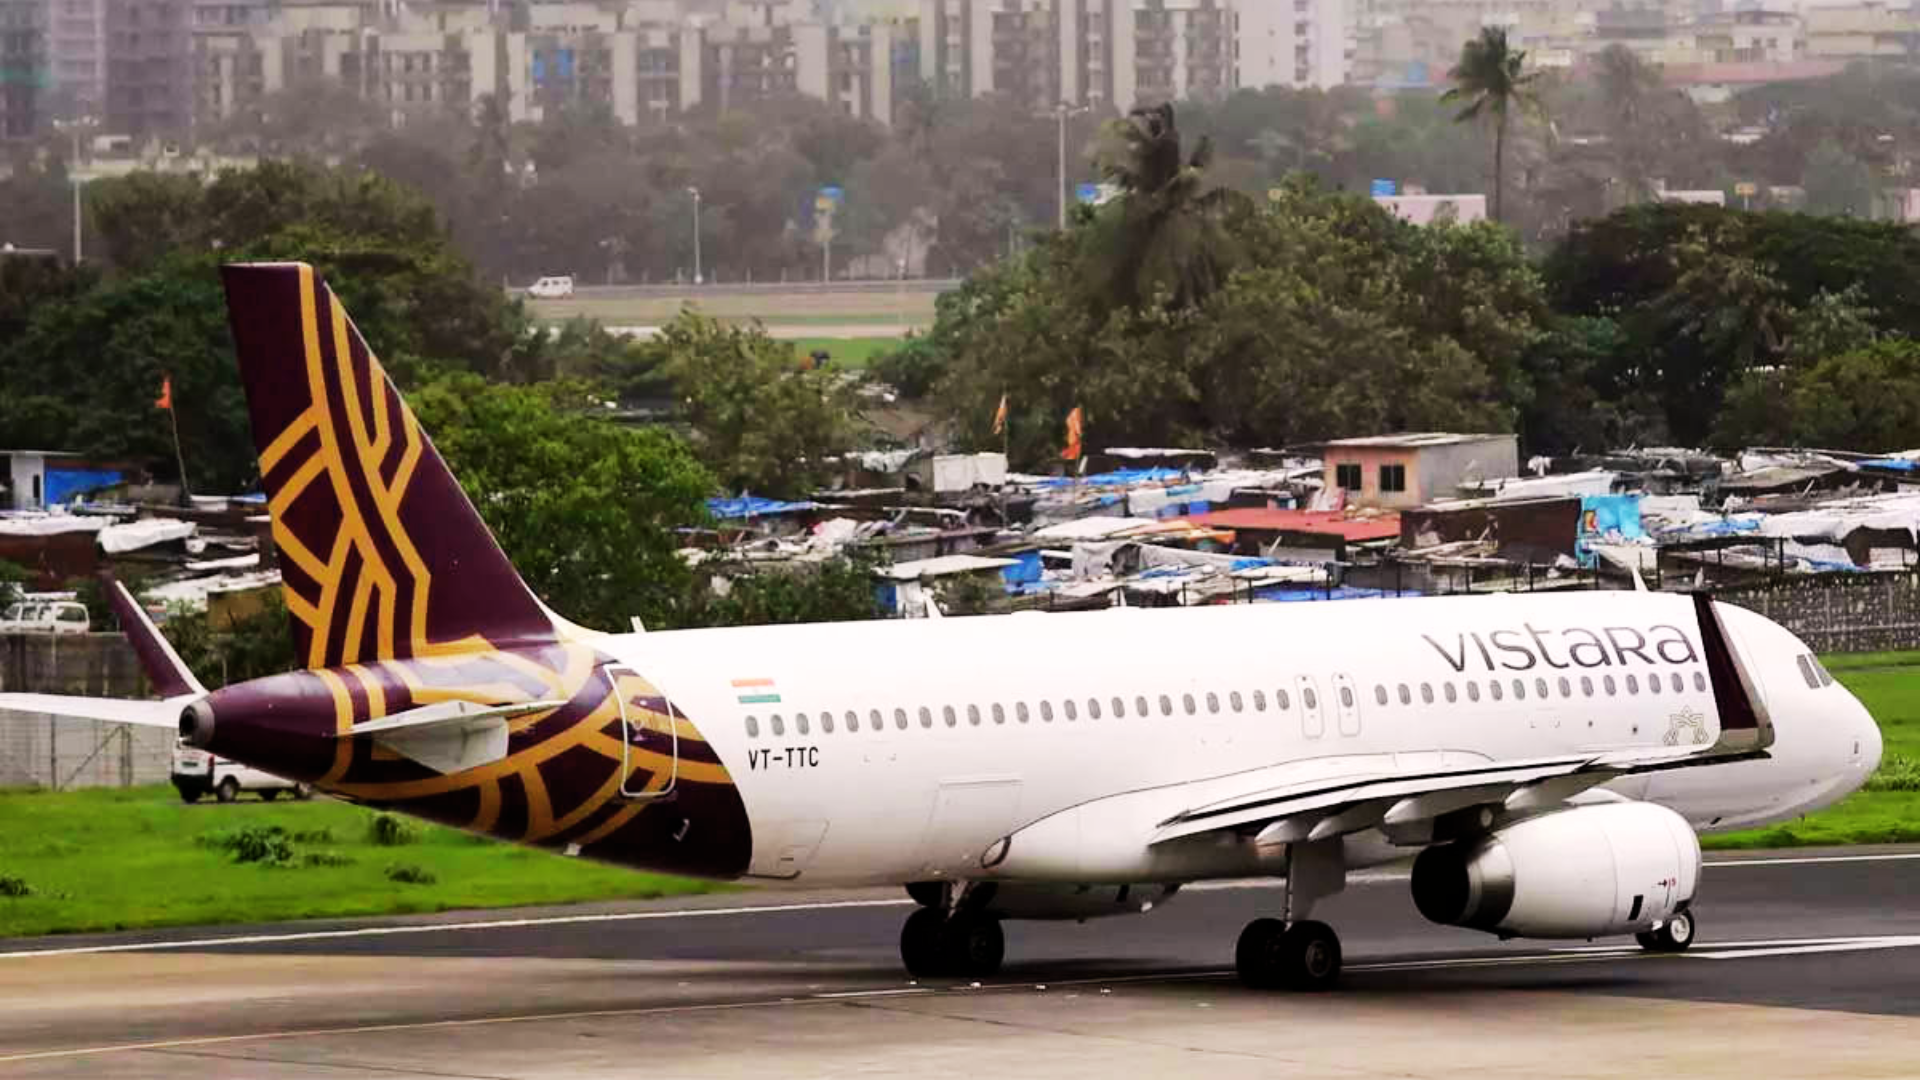 Vistara Pilots Allegedly Threatened And Treated as ‘Bonded Labourers’, Claim Air India Unions